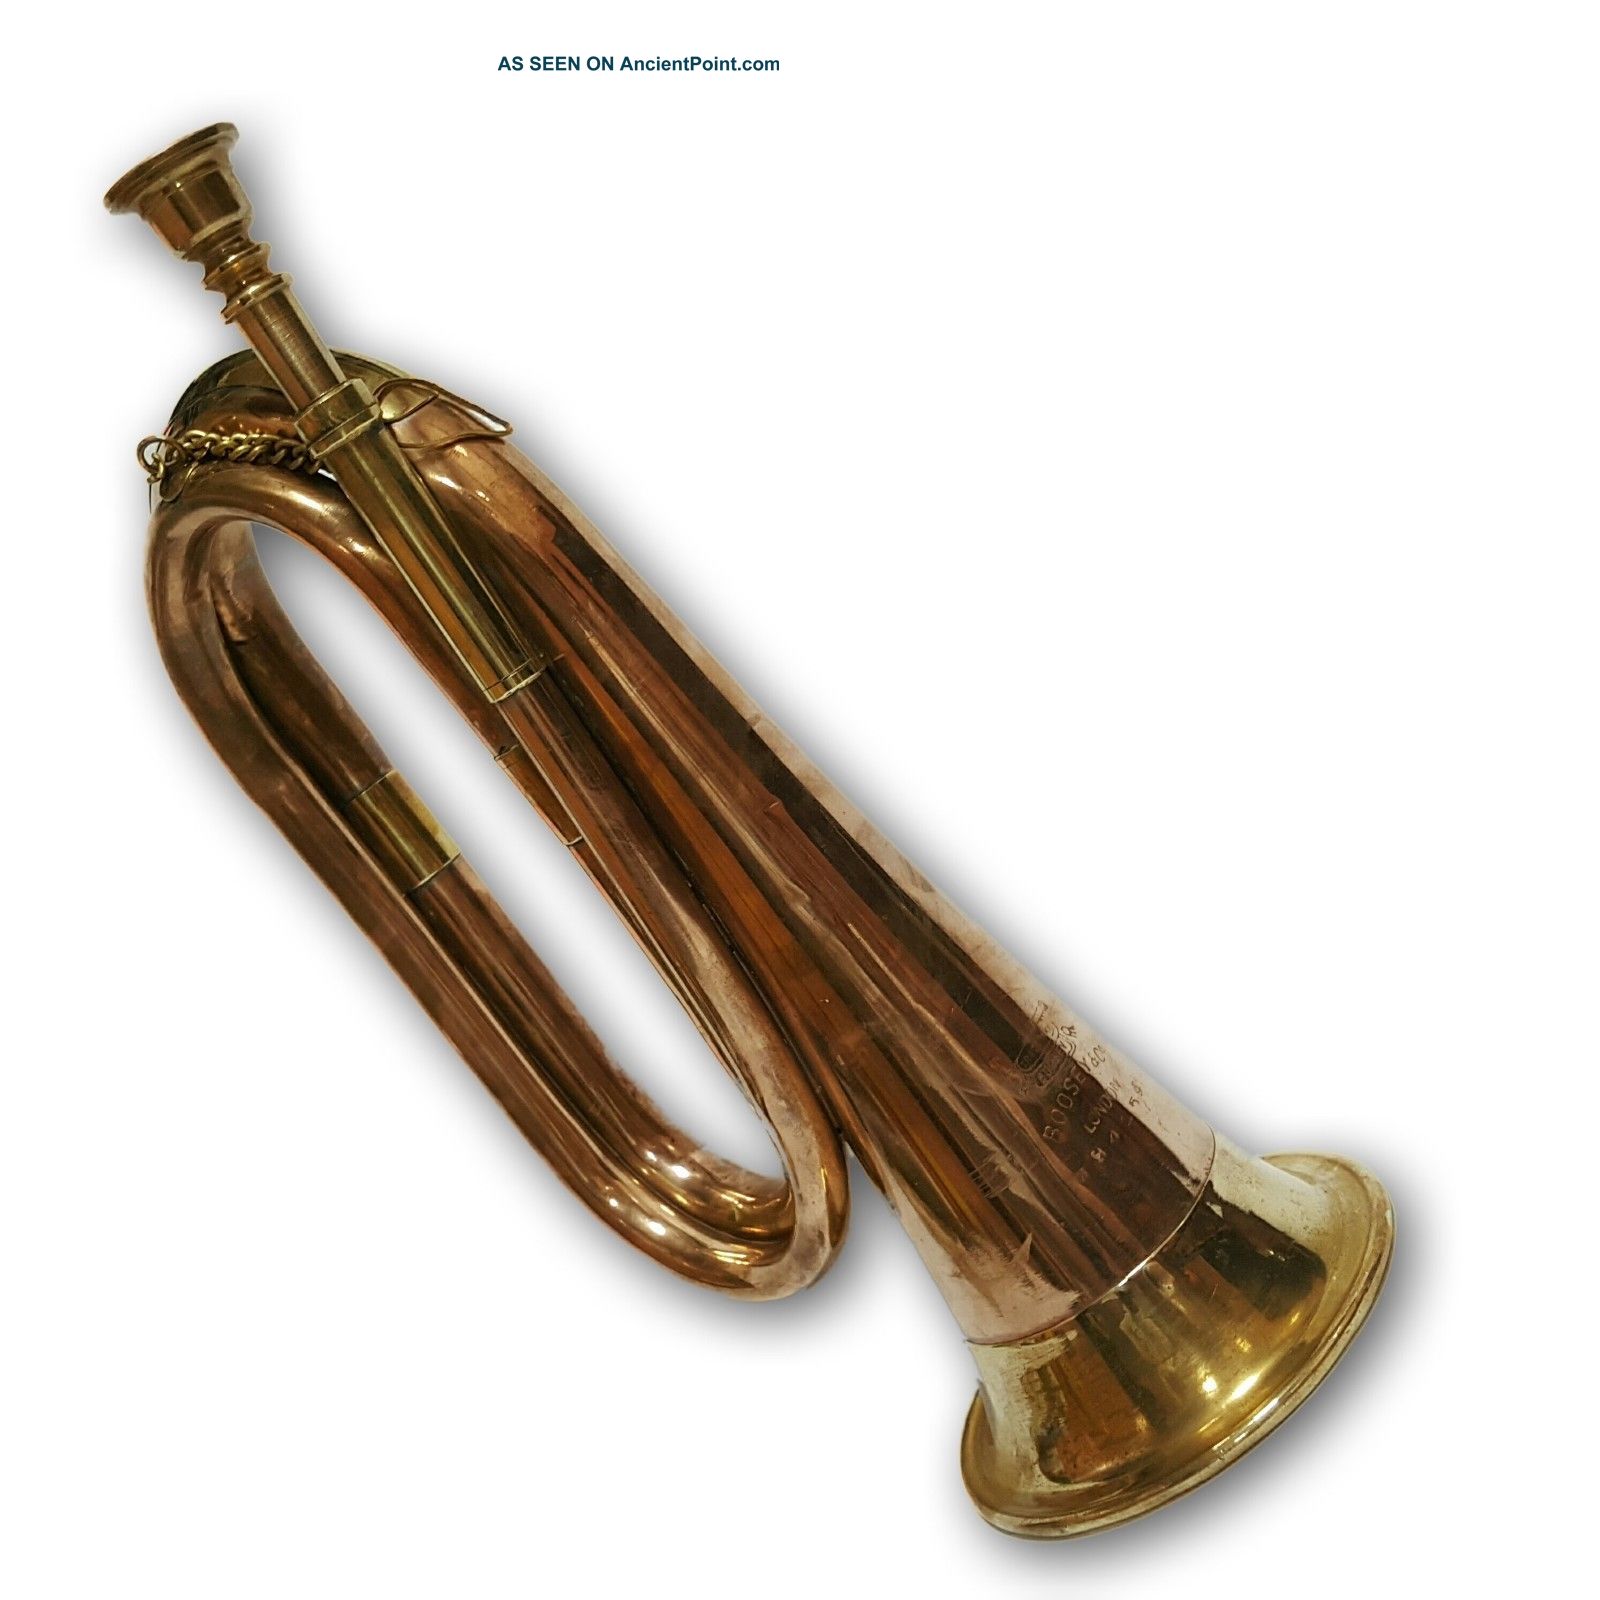 Copper & Brass Attractive Look Old School Orchestra Band Bugle Gift Item Hc 02 Brass photo